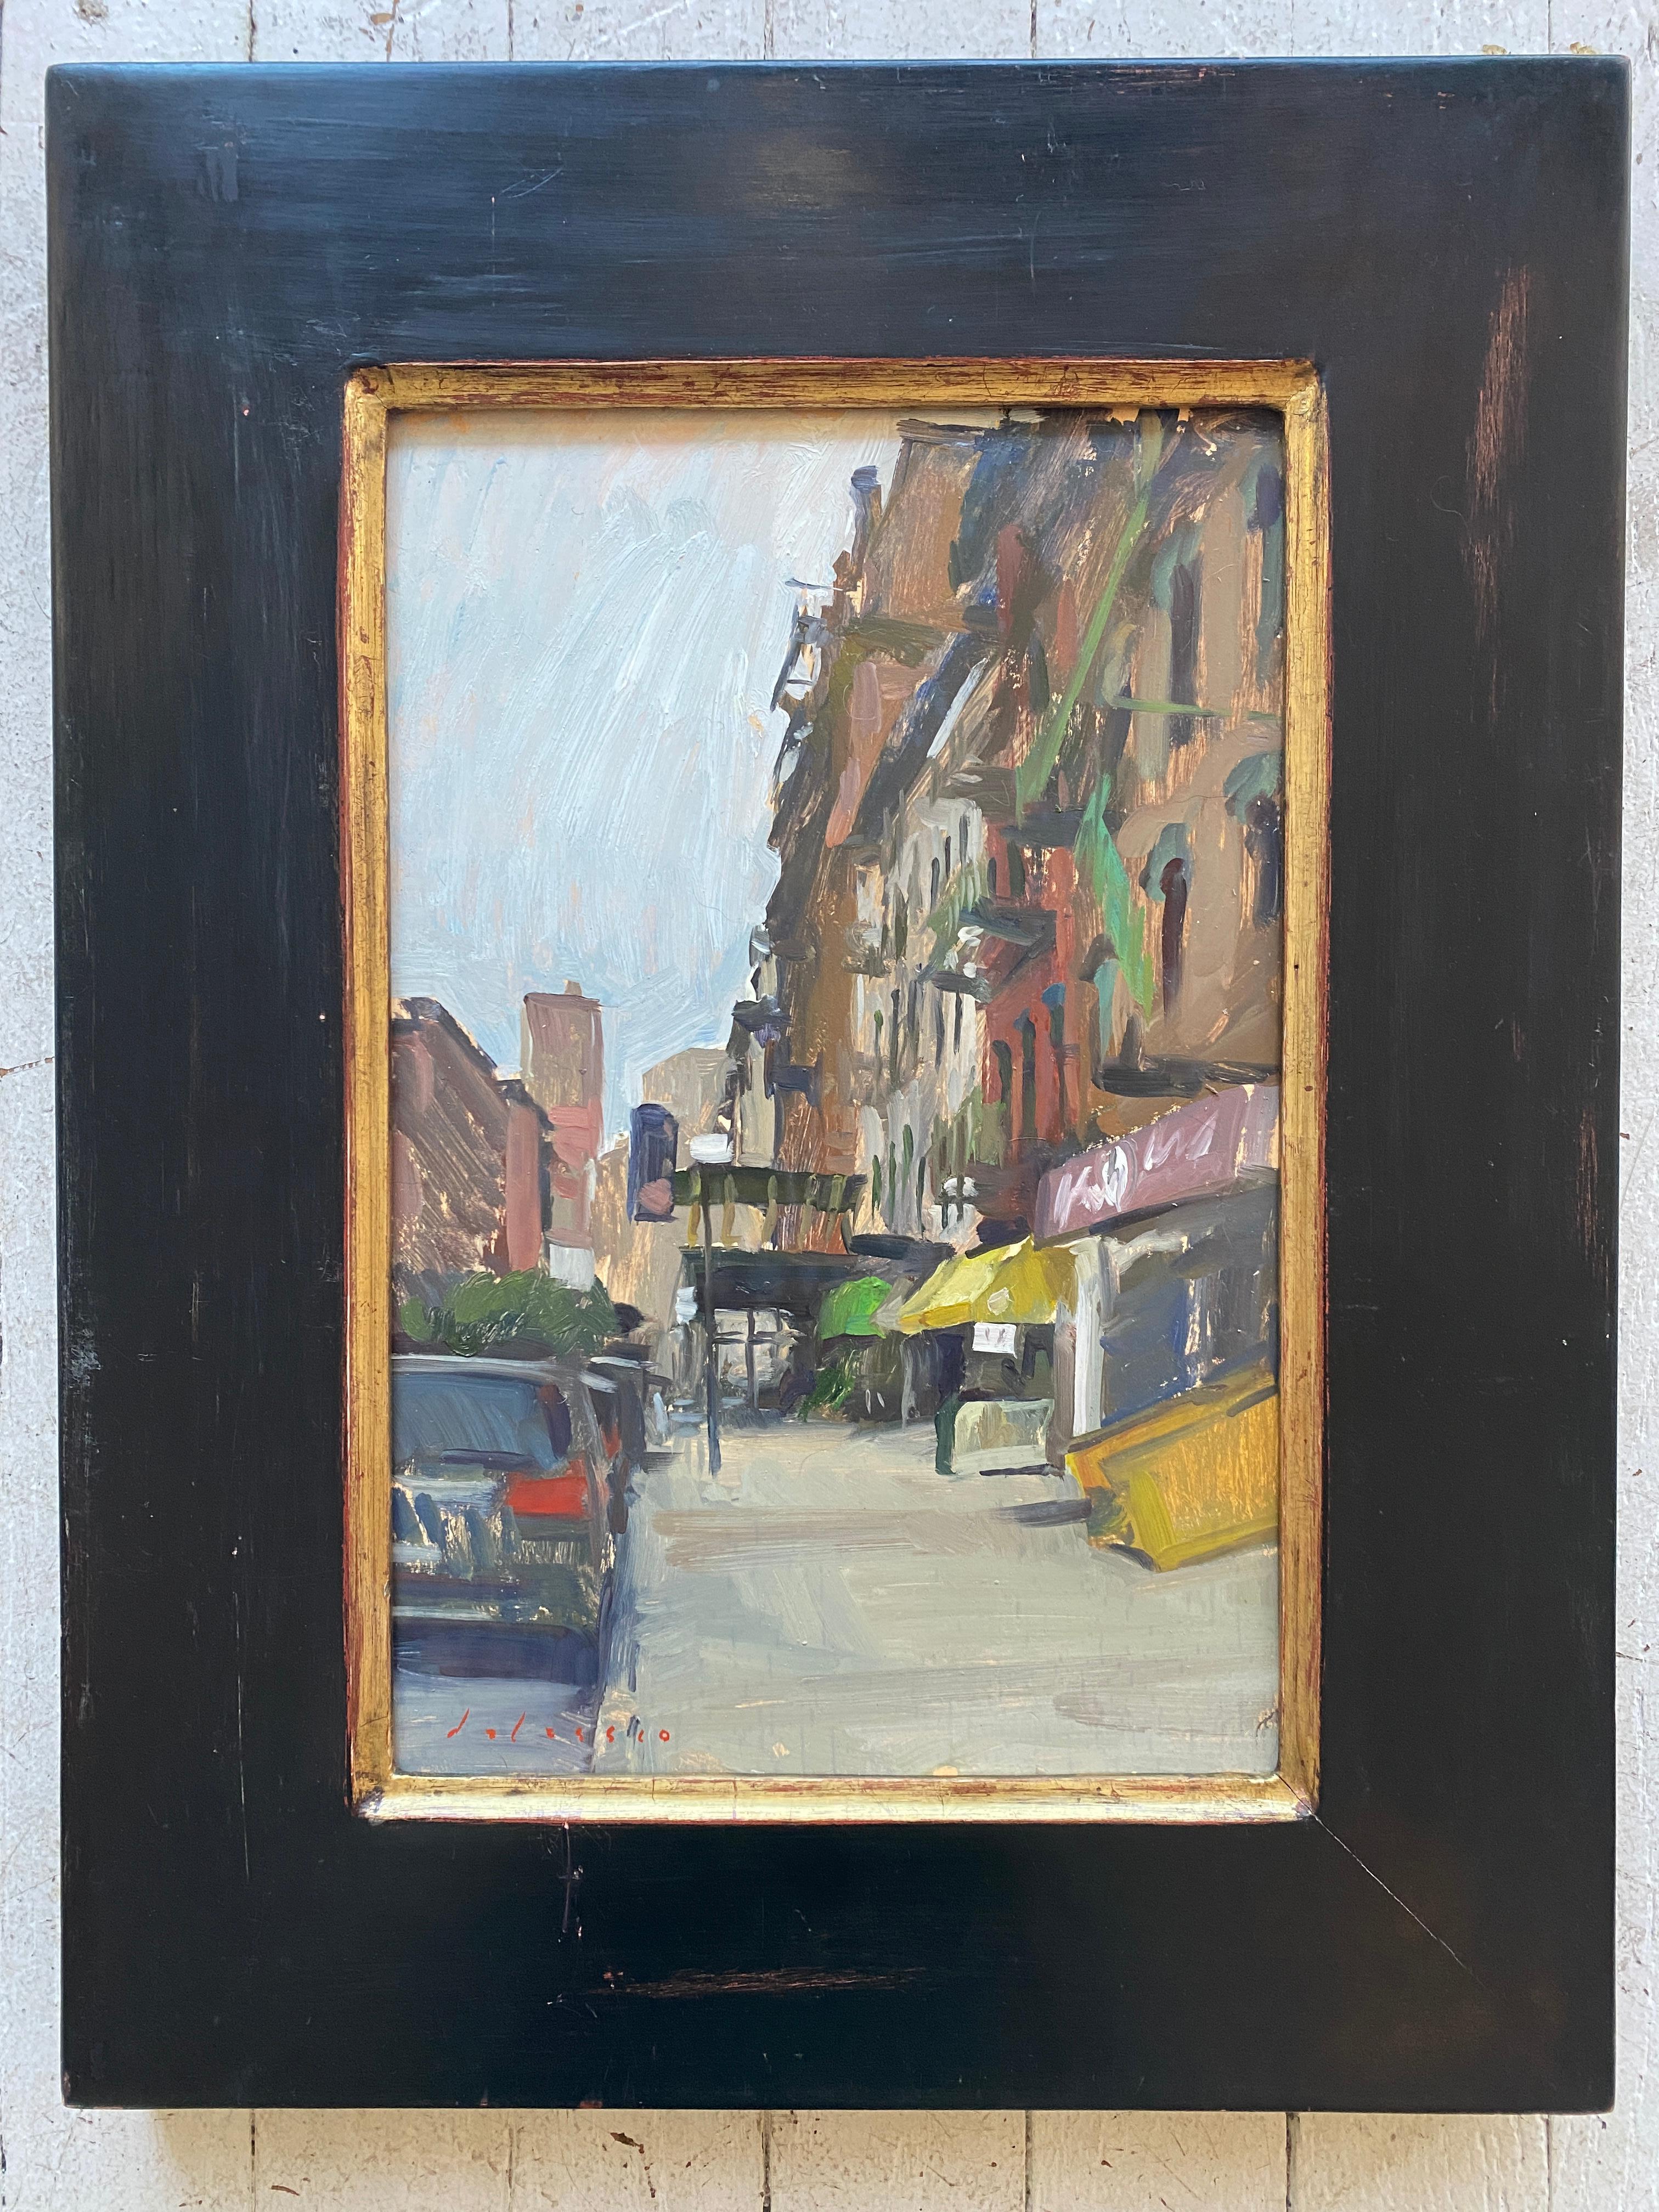 Centre Street, Chinatown, NY – Painting von Marc Dalessio